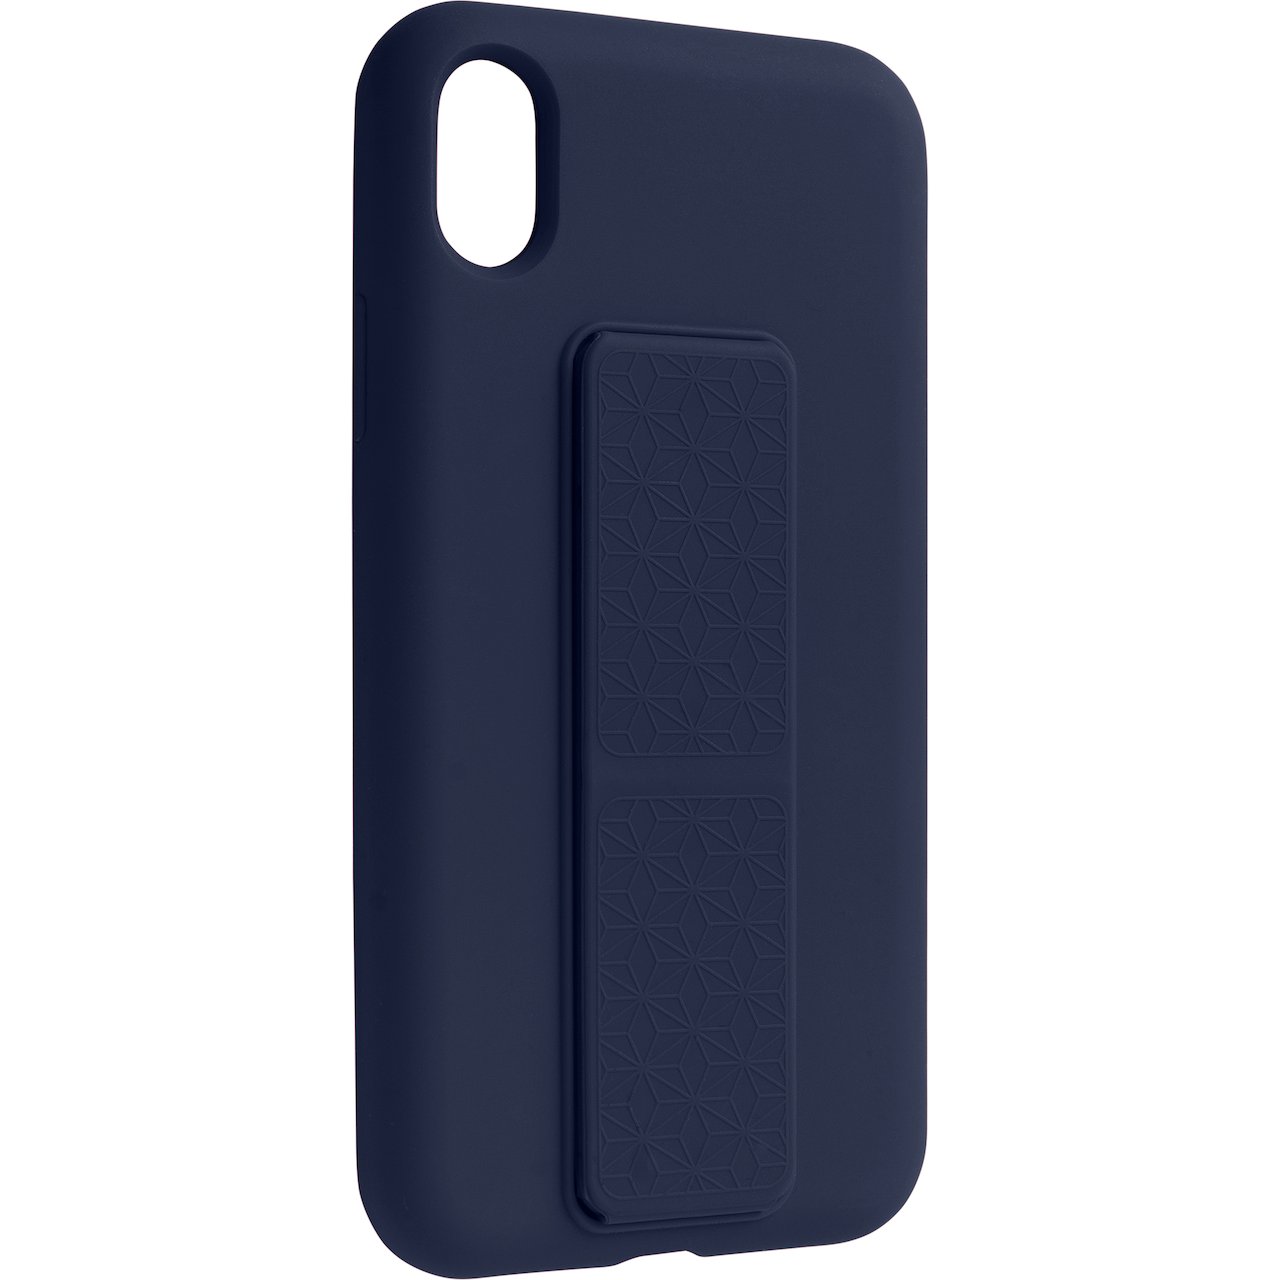 LEKI BYCPH COVER IPHONE X/XS SILIKON MØRK BLÅ GRIP AND STAND